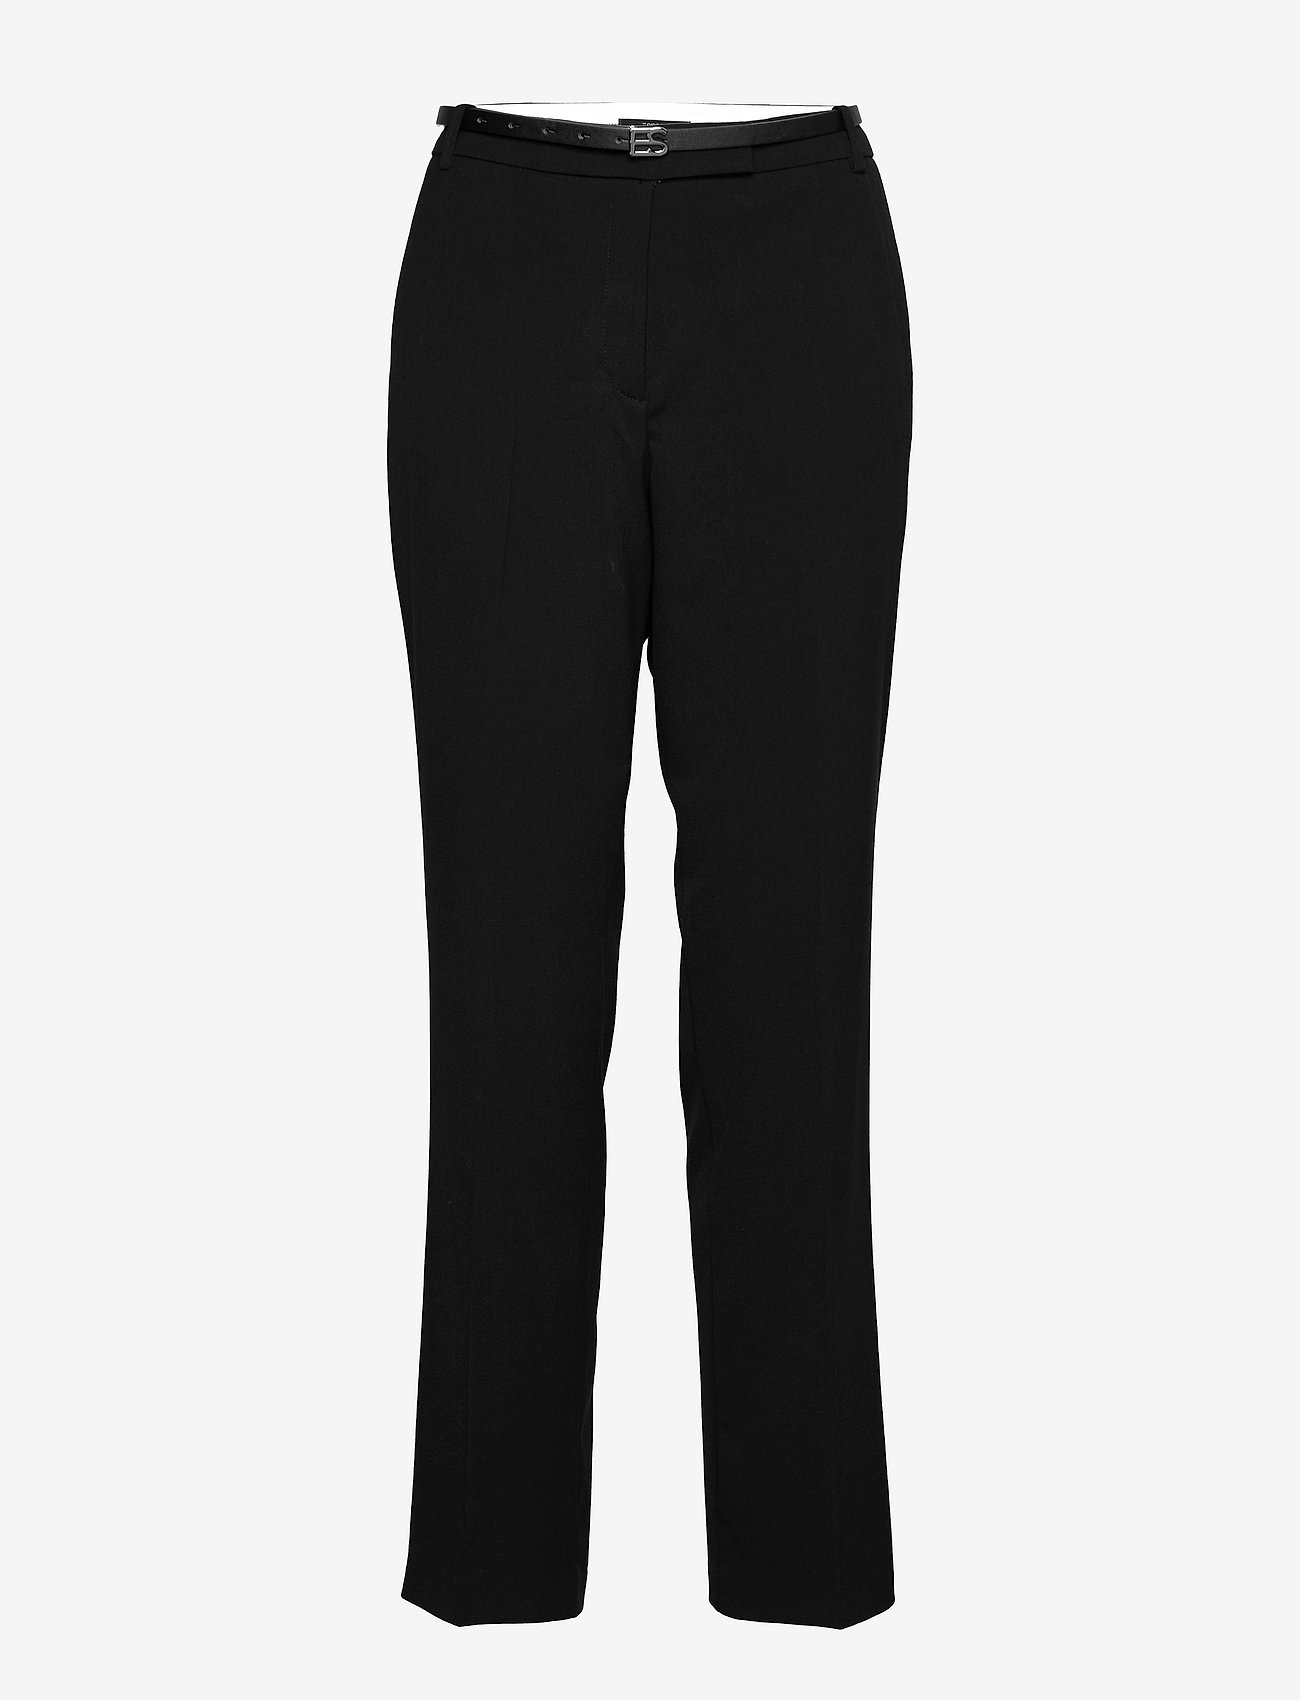 Esprit Collection - Pants woven - formell - black - 0